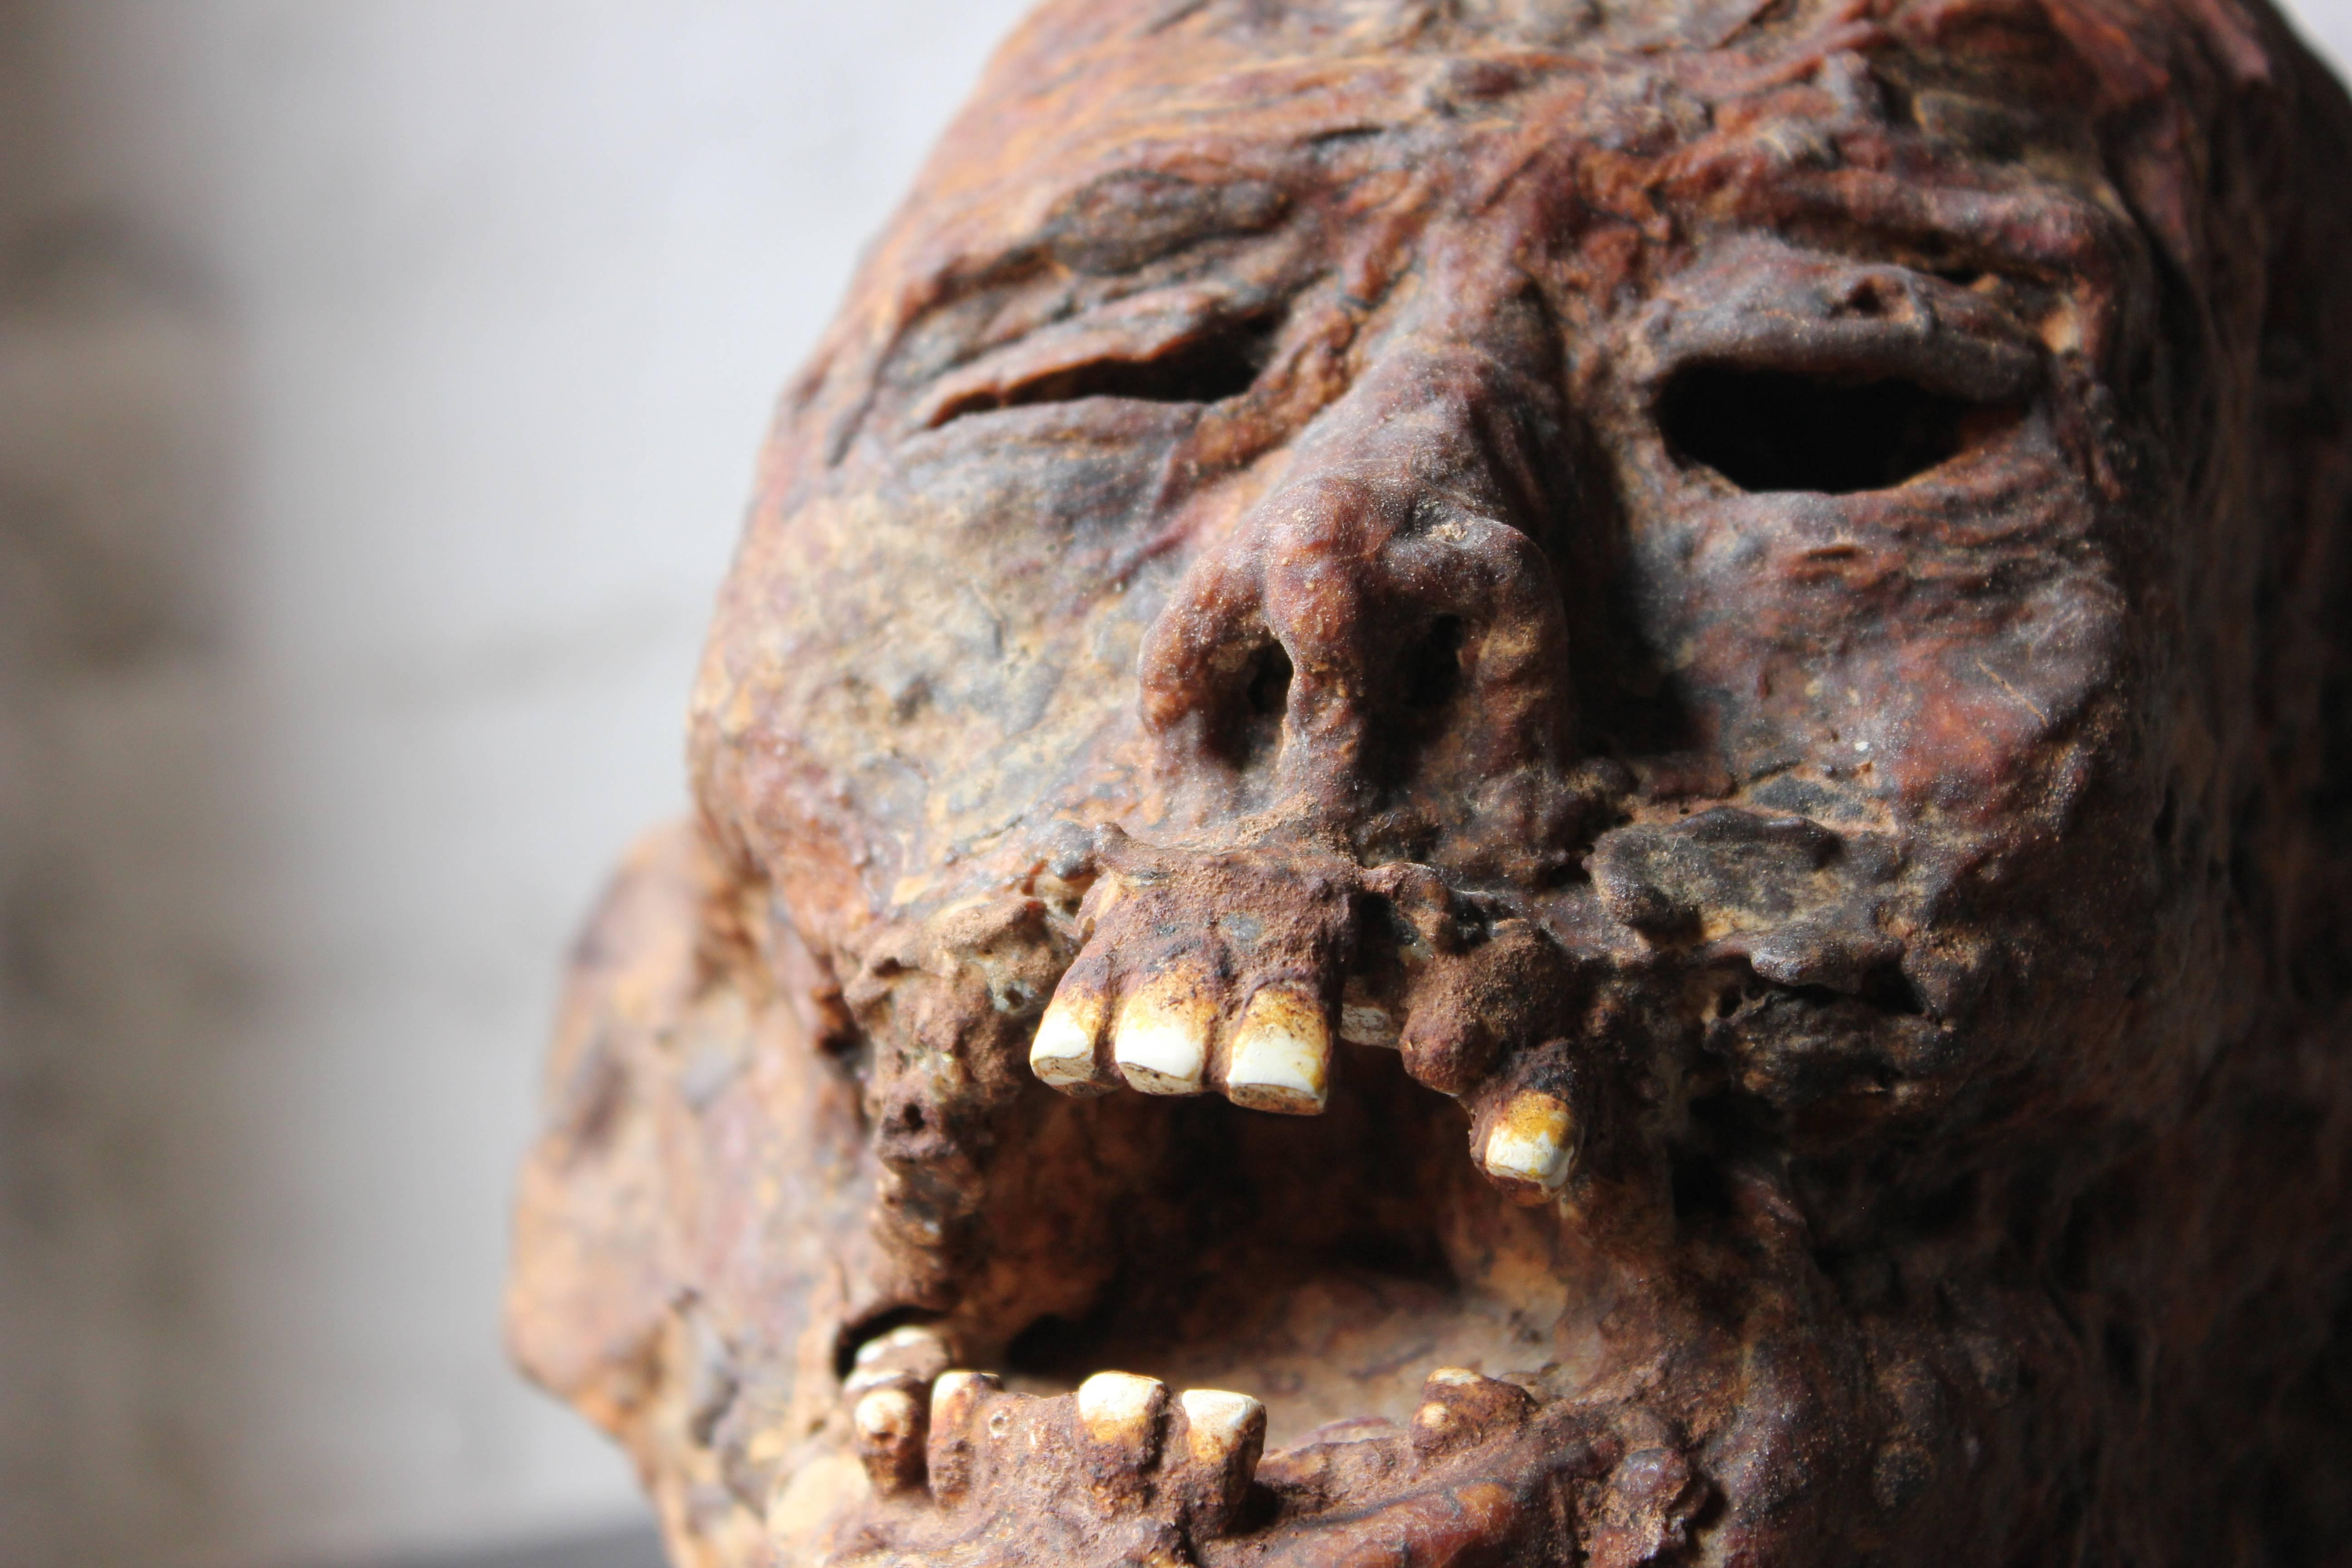 Superbly Modelled Mummified Head Film Prop by Alan Friswell 1